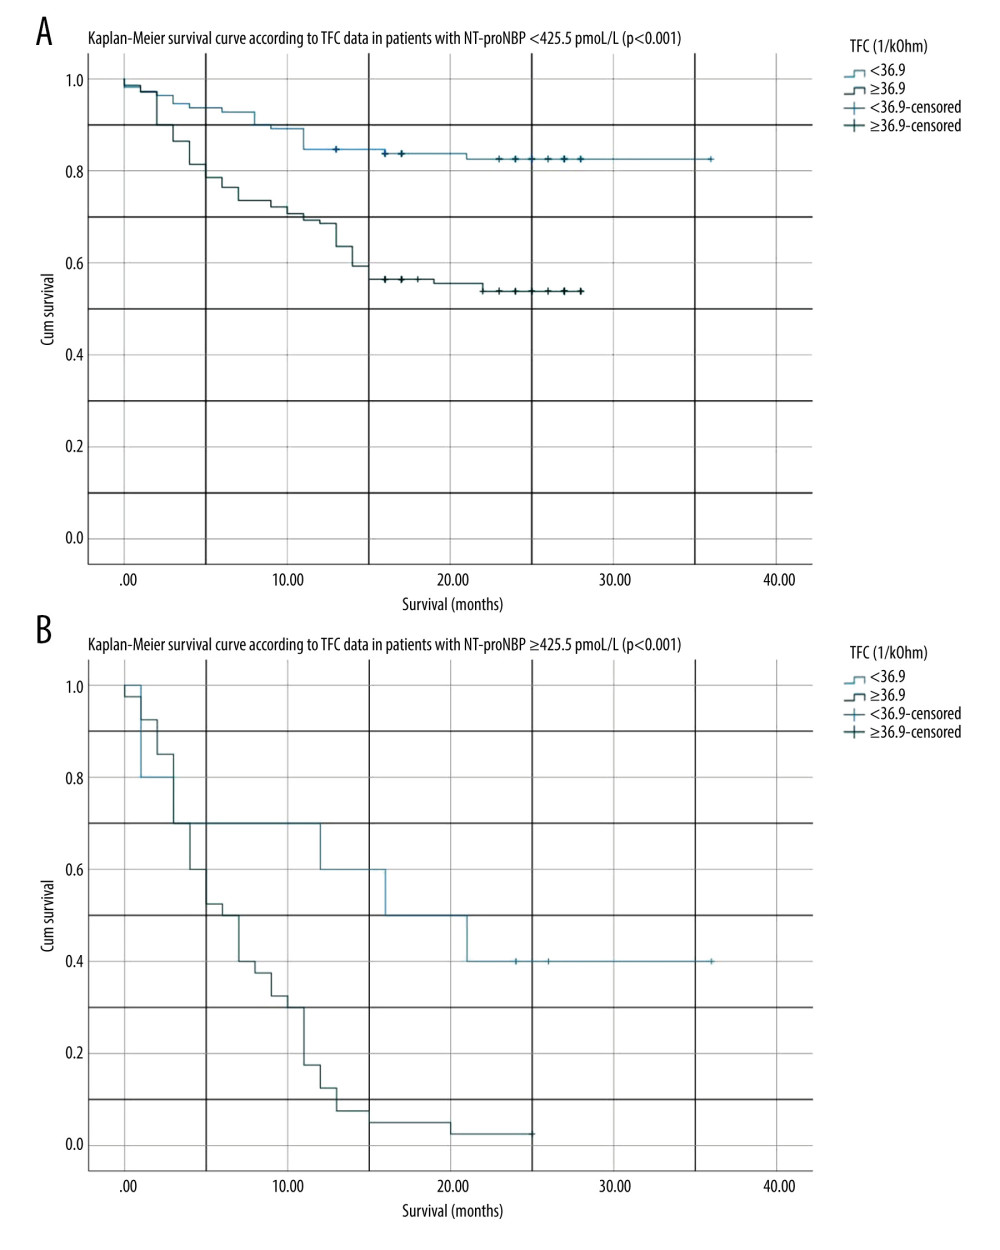 (A) Kaplan-Meier survival curve according to thoracic fluid content (TFC) in patients with amino-terminal pro-brain natriuretic peptide (NT-proBNP) <425.5 pmoL/L throughout a maximal follow-up of 36 months. (B) Kaplan-Meier survival curve according to TFC in patients with NT-proBNP ≥425.5 pmoL/L throughout a maximum follow-up of 36 months. Figures generated by SPSS version 27.0 (IBM Corp, Armonk, USA).